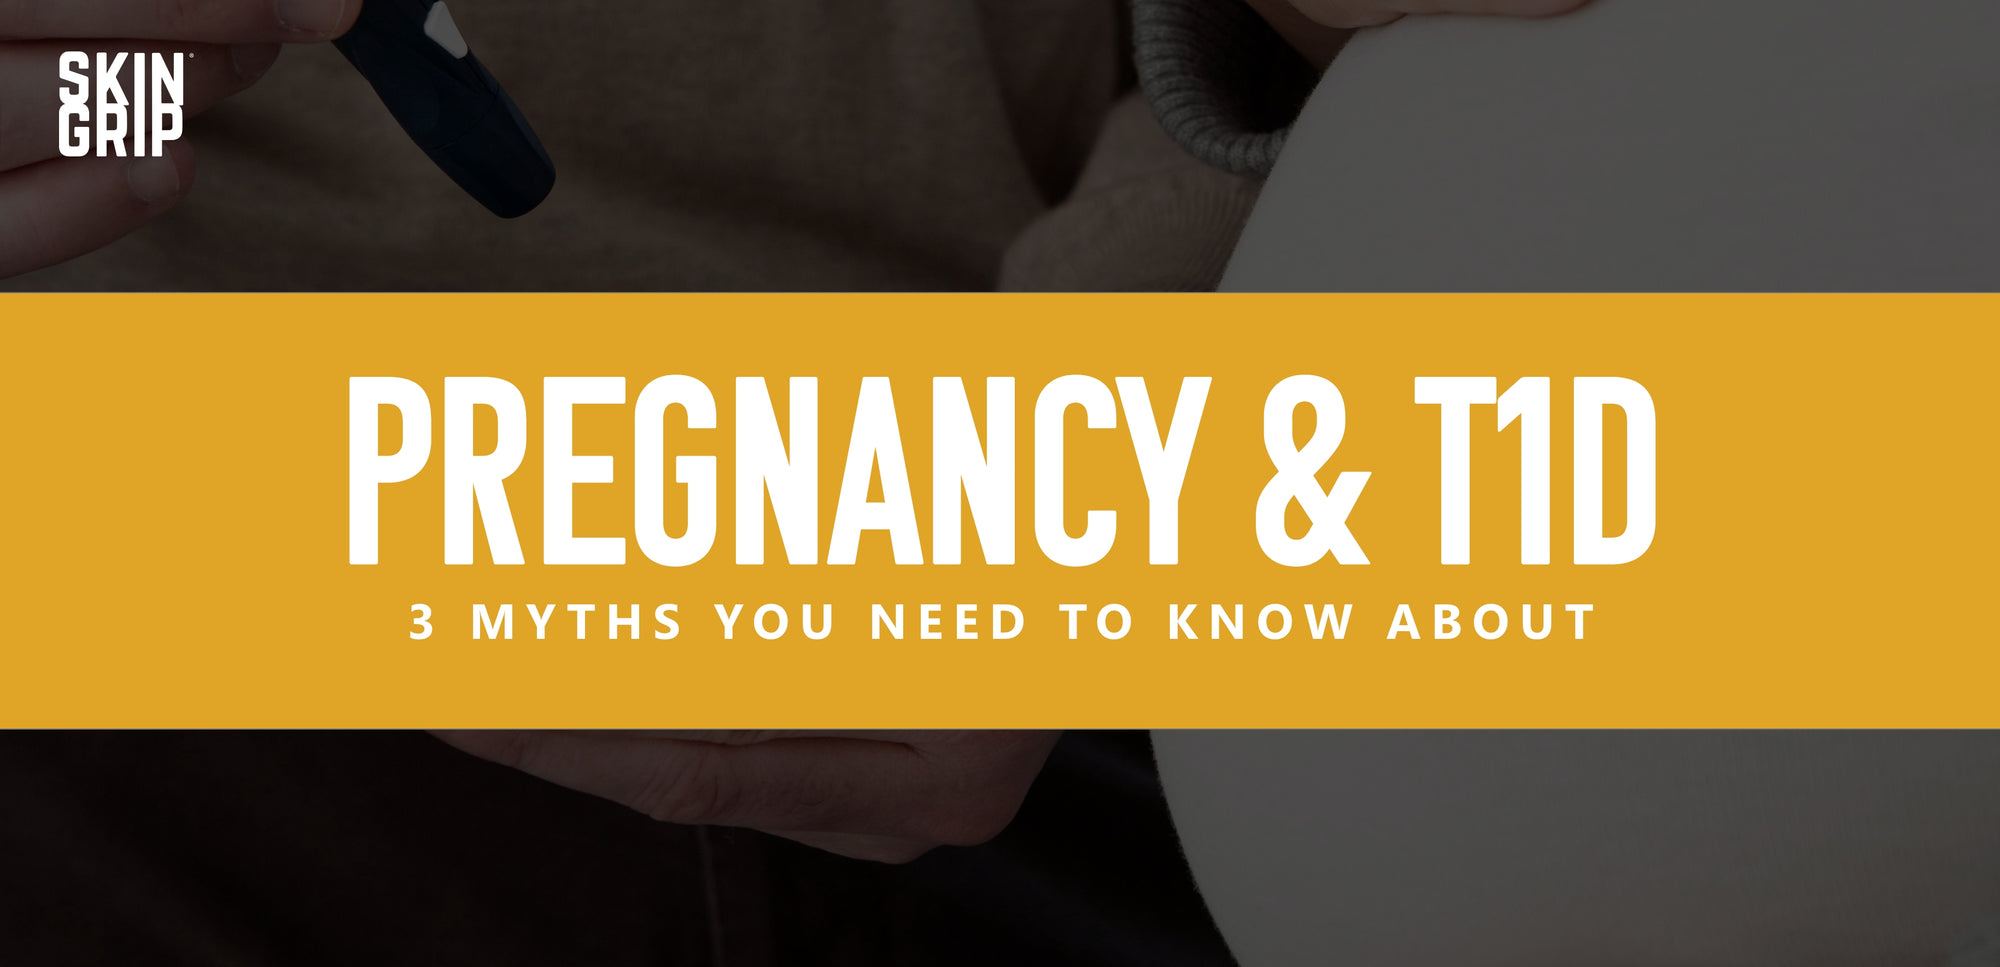 Type 1 Diabetes & Pregnancy: 3 Myths You Need to Know About